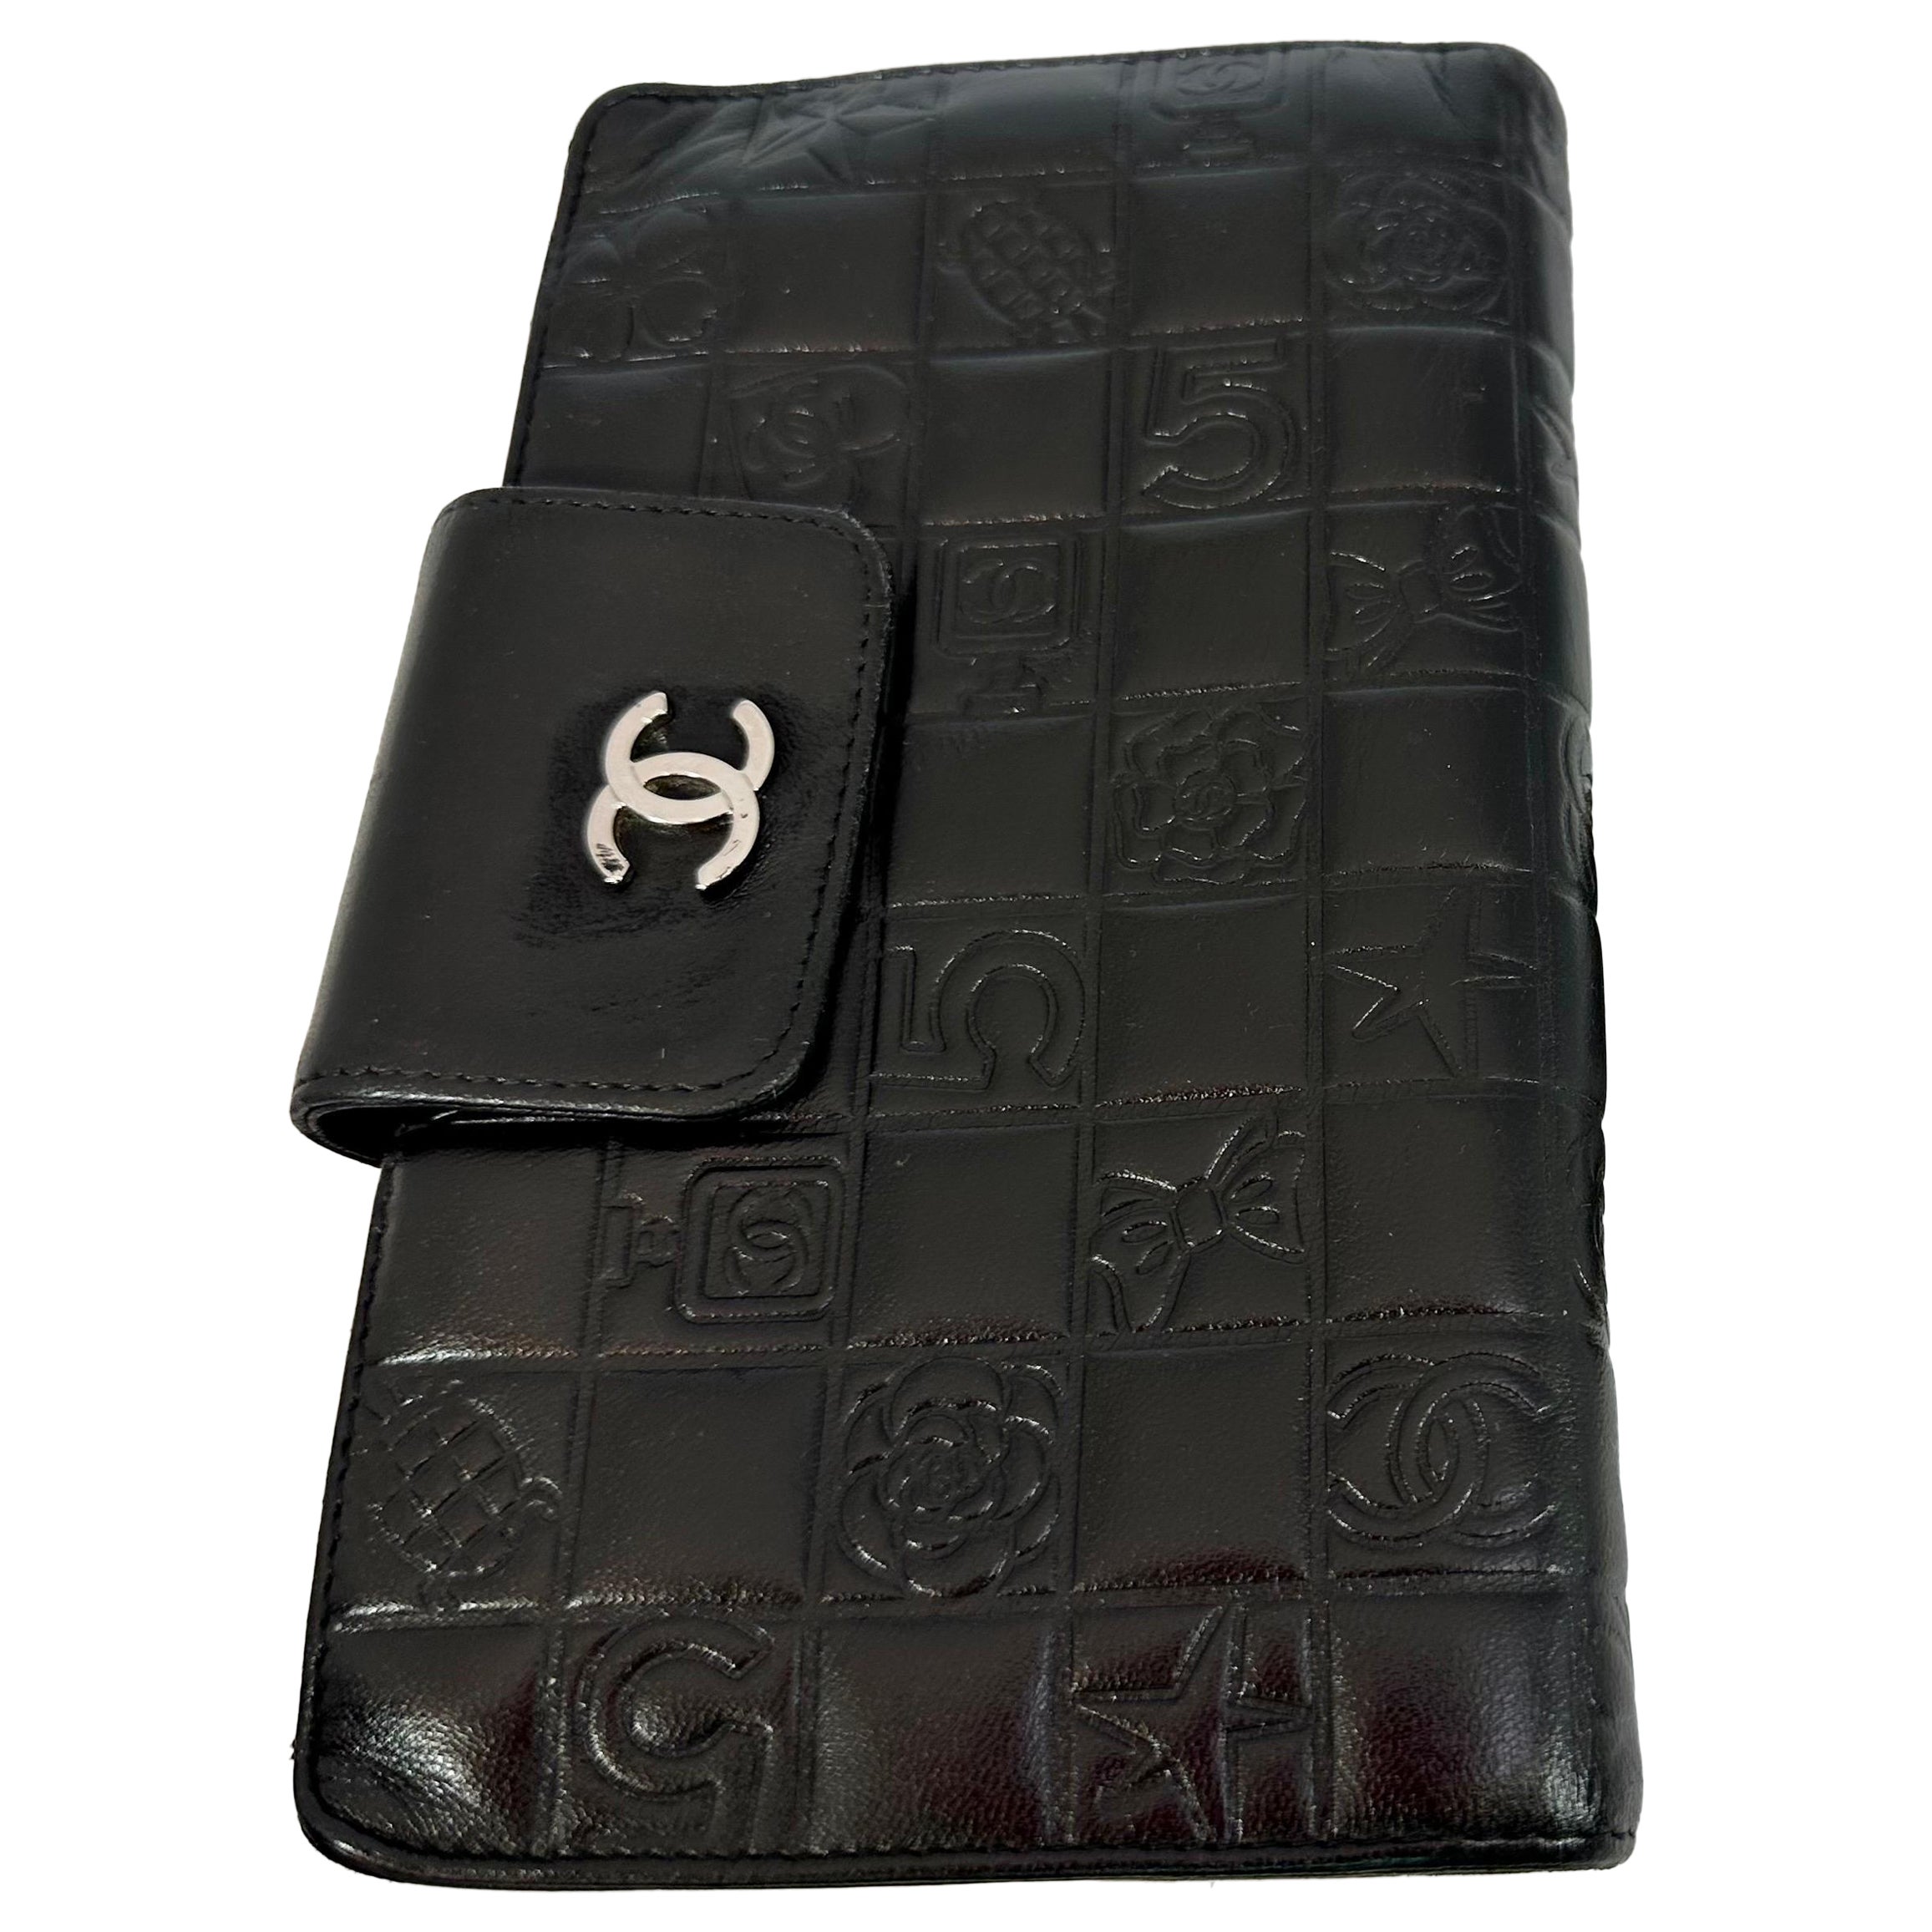 Chanel Quilted Lambskin Chocolate Bar Bag